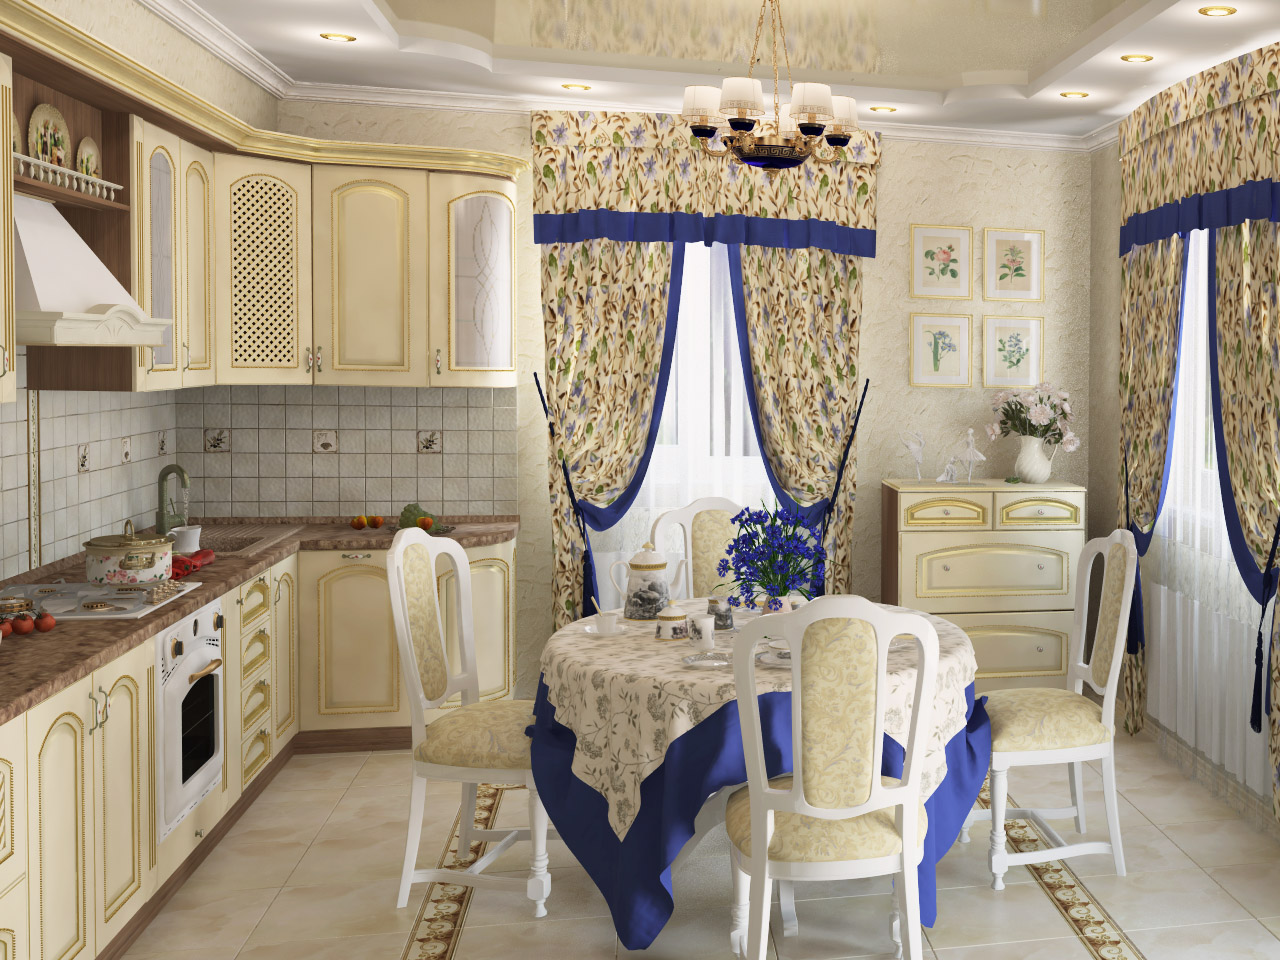 Curtains made of natural fabric in the decoration of the house in the style of Provence